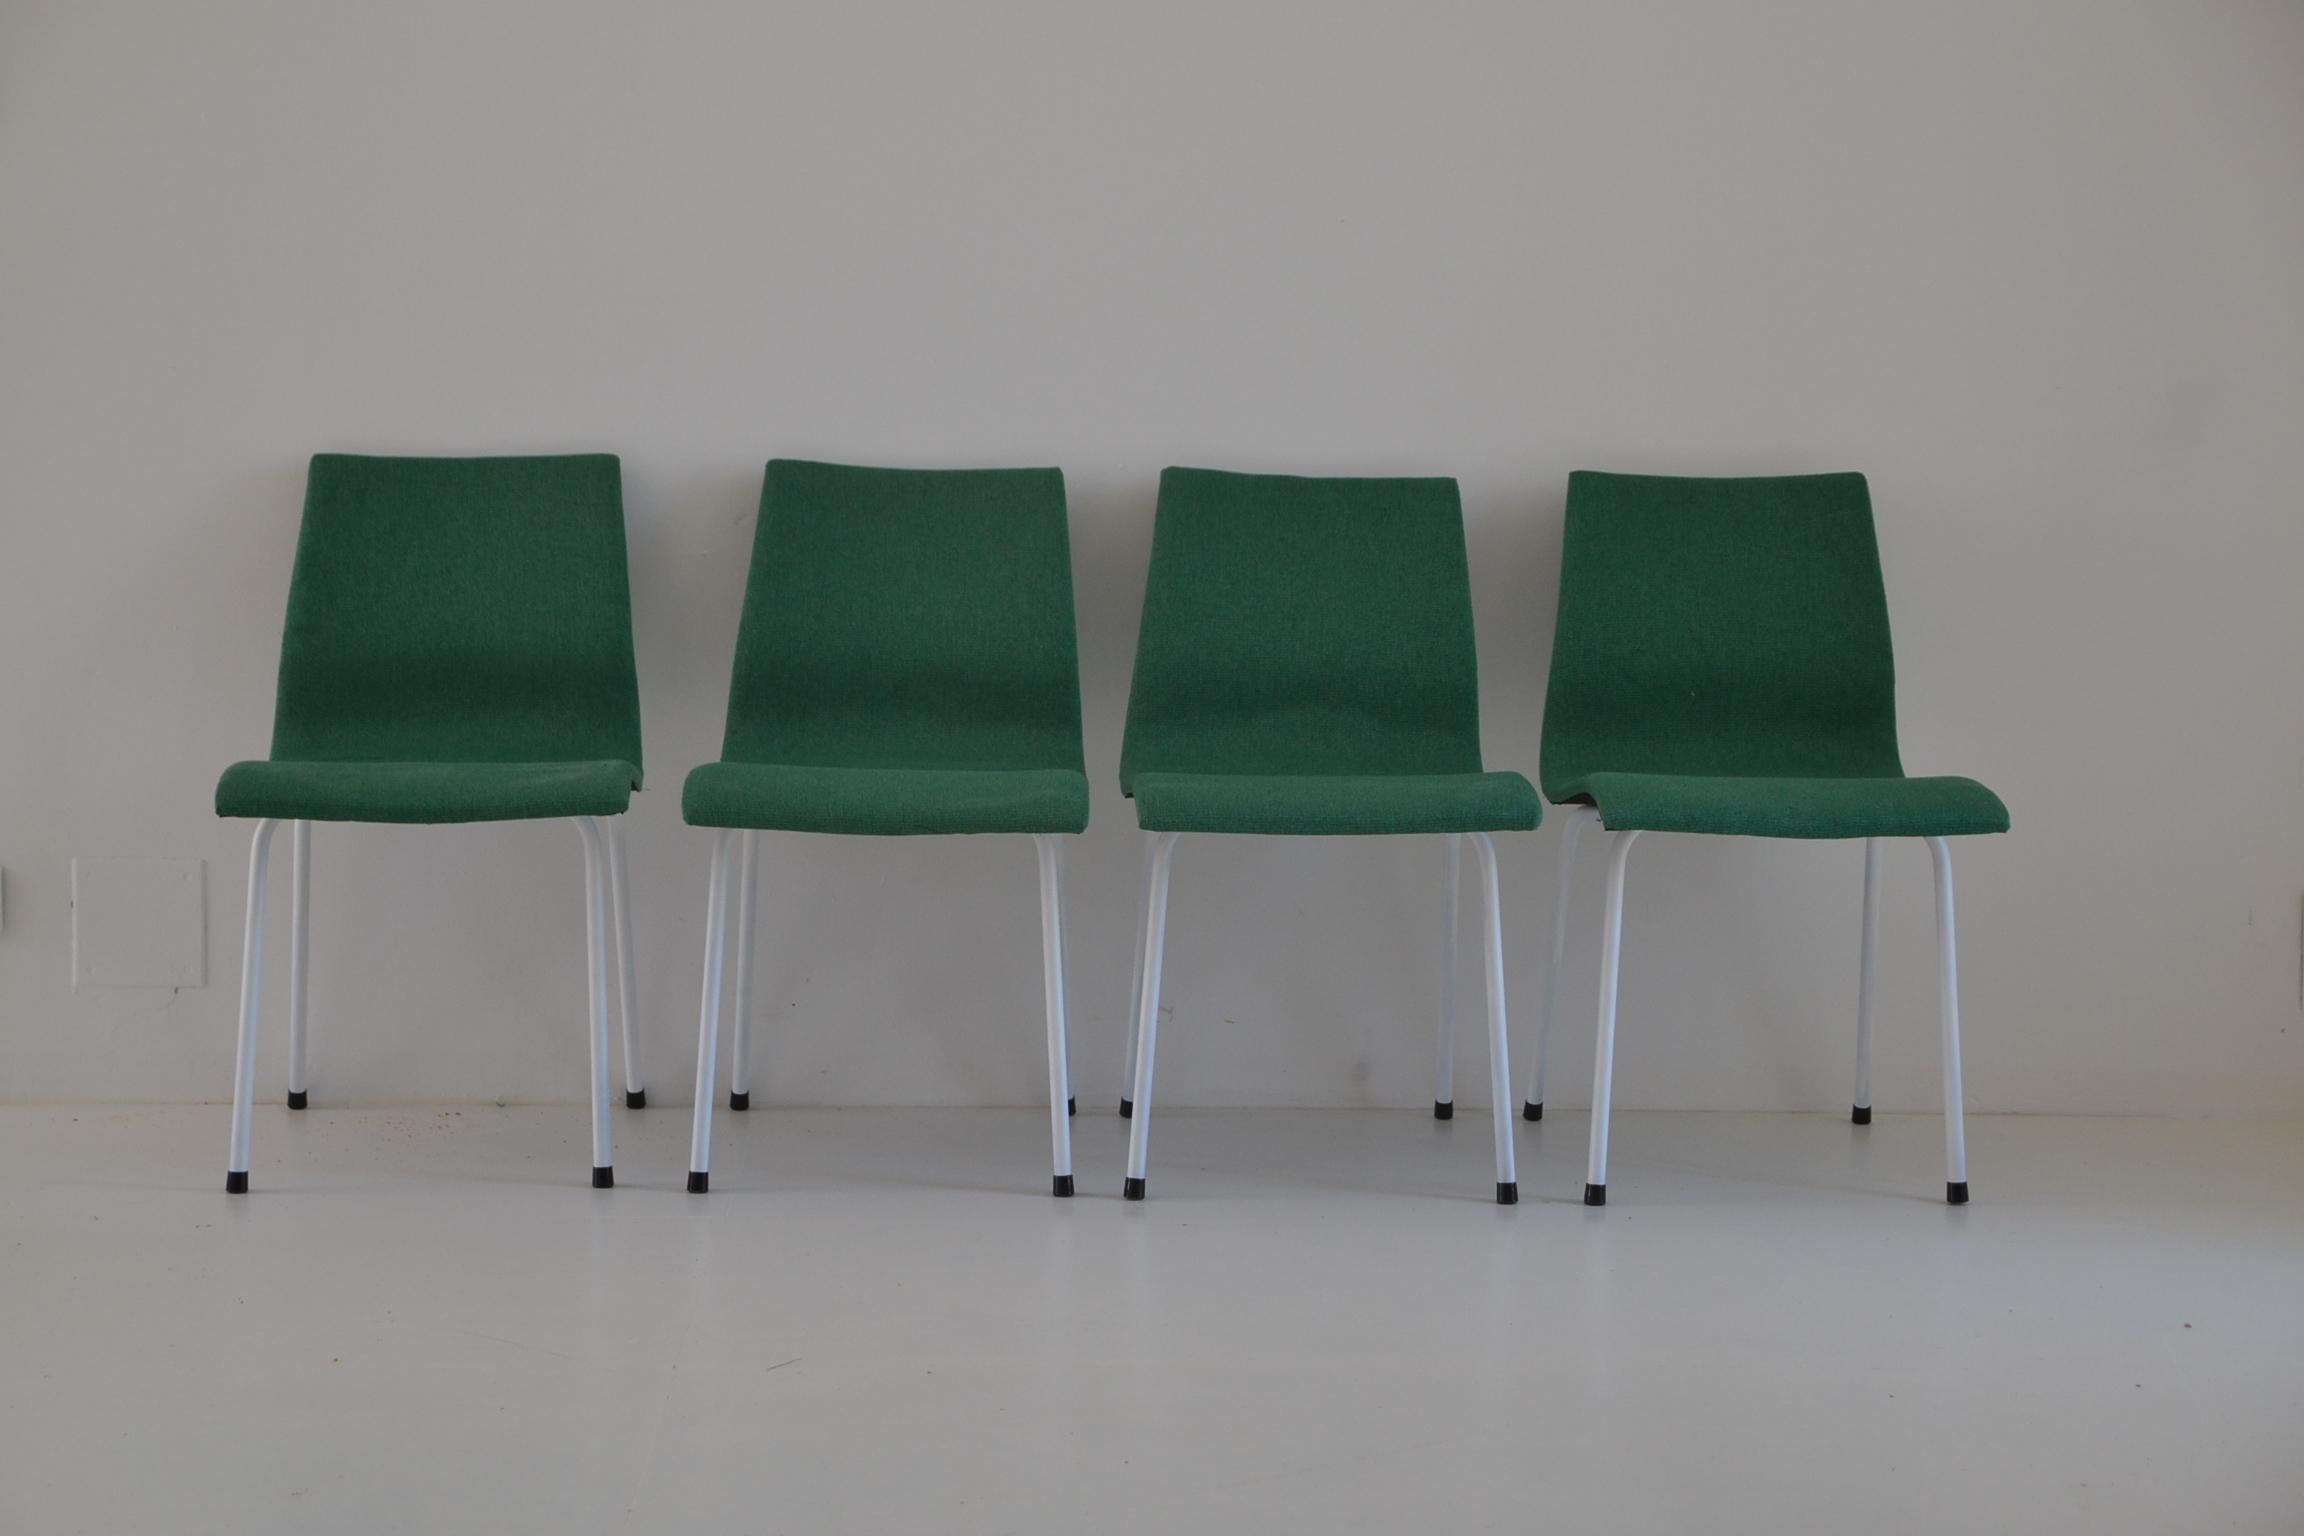 Set of chair by René-Jean Caillette
Edit GROUPE IV Charron
French midcentury, 1950
Chairs completely restored.